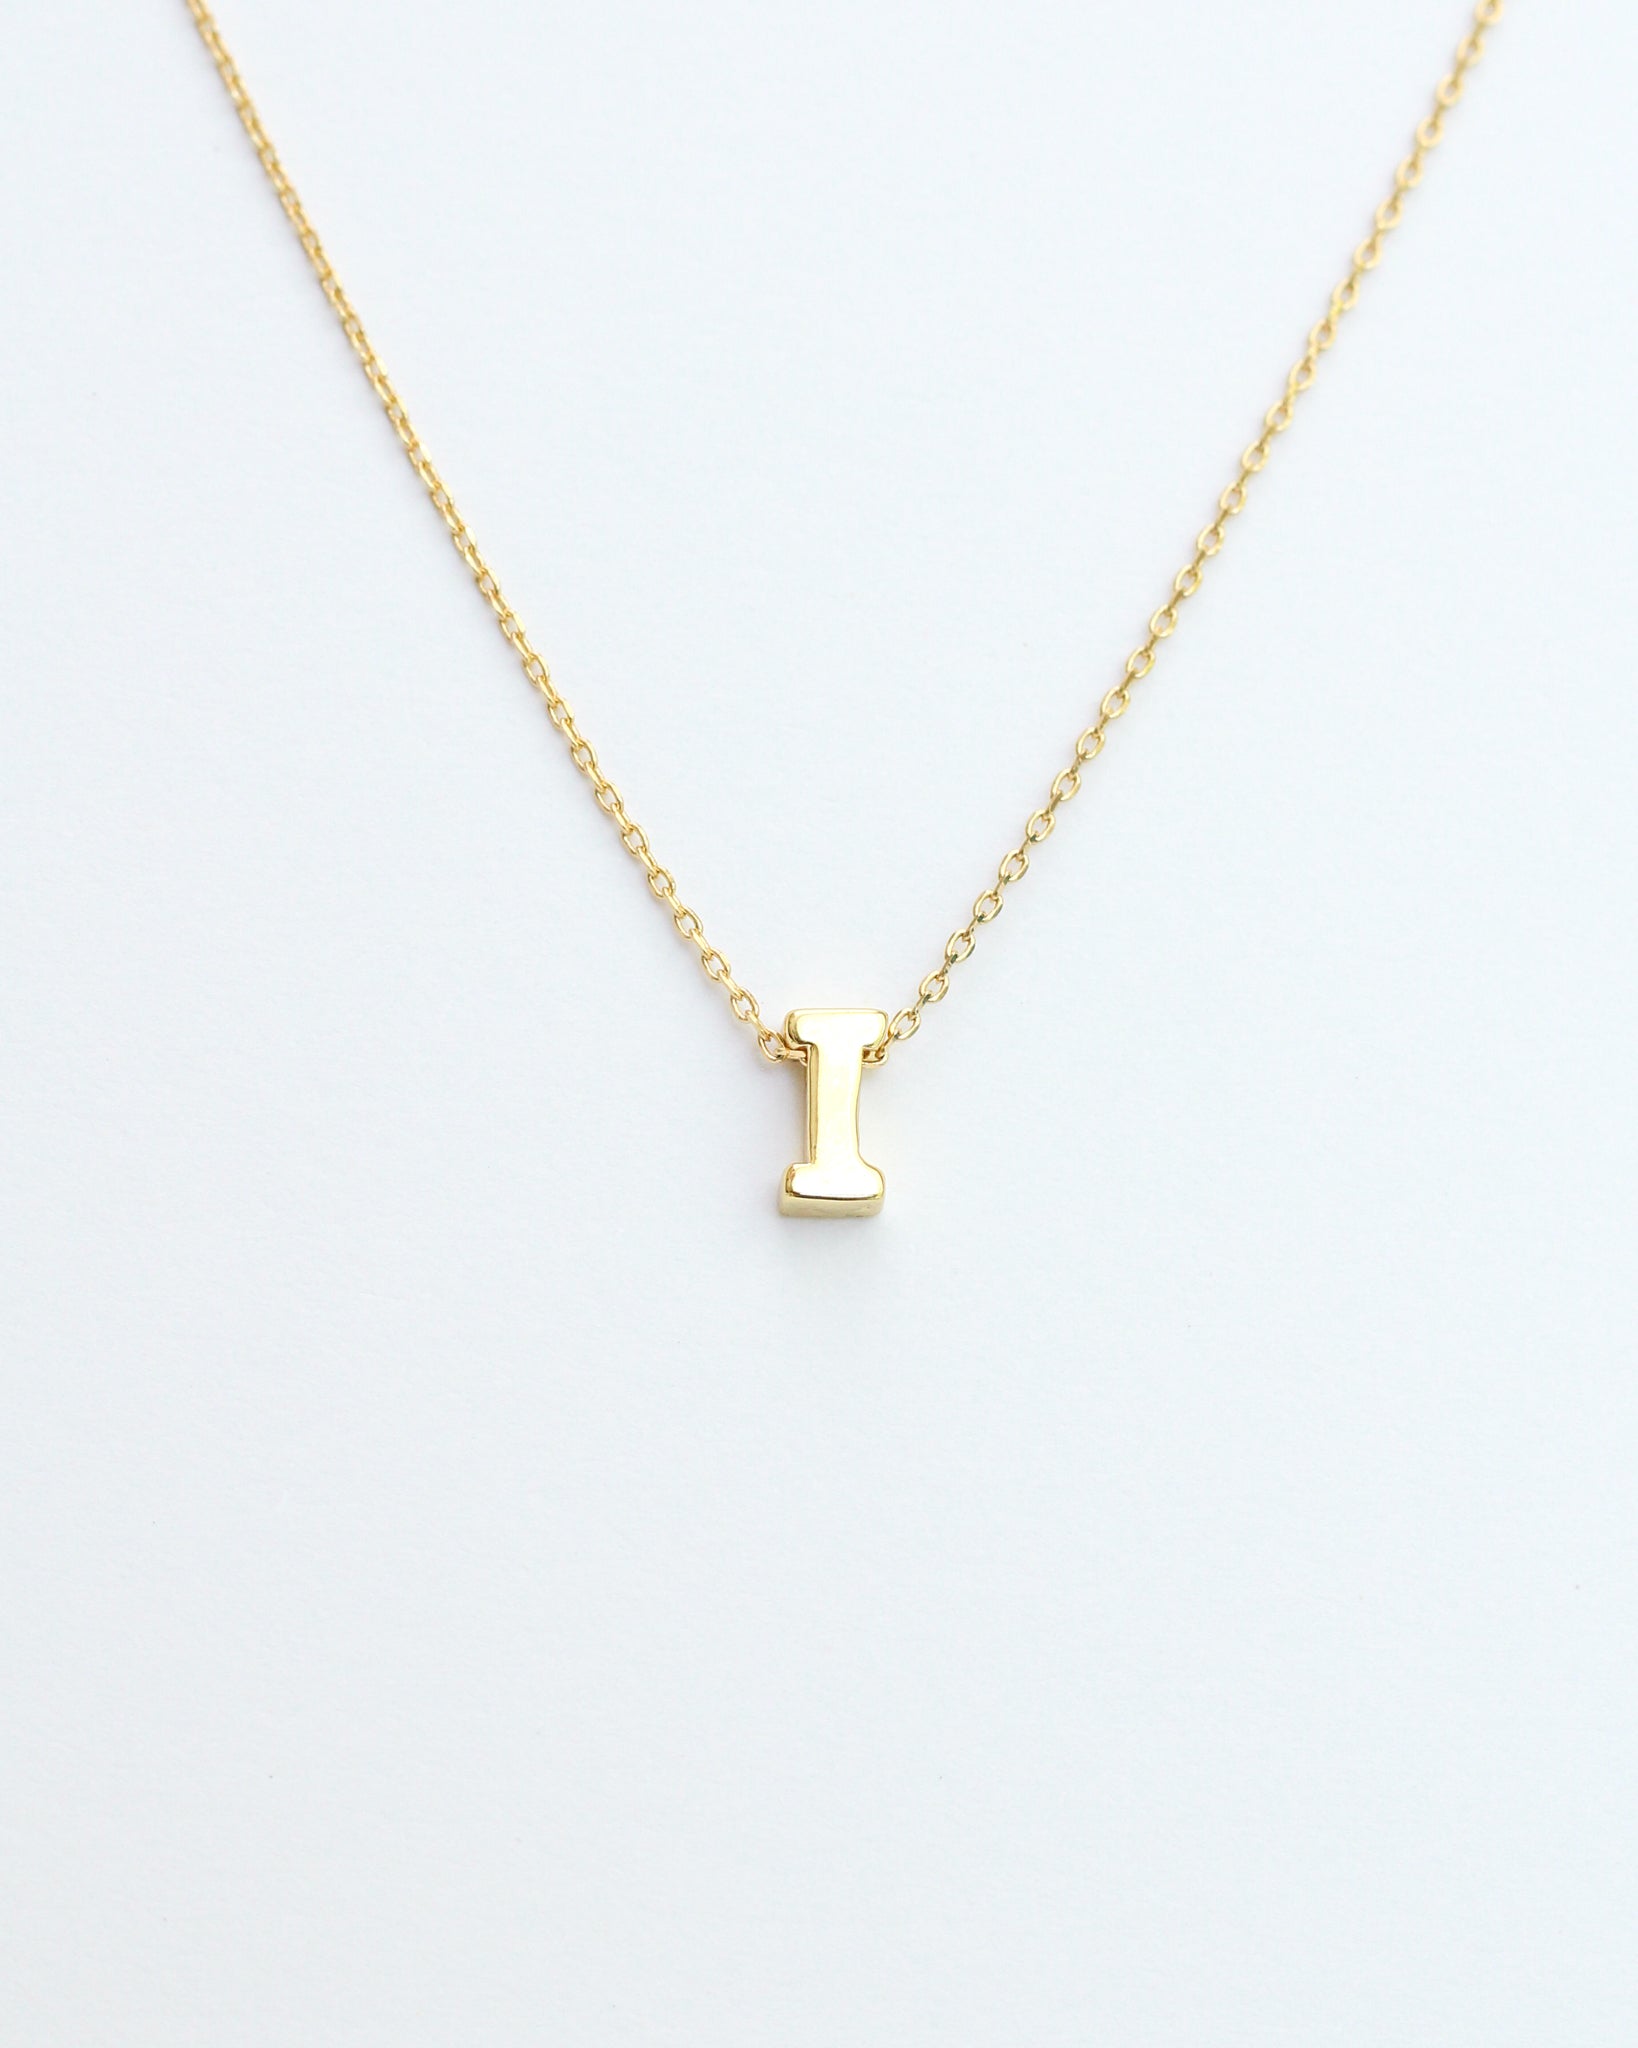 Gold Initial Letter Block Necklace. Letter I necklace